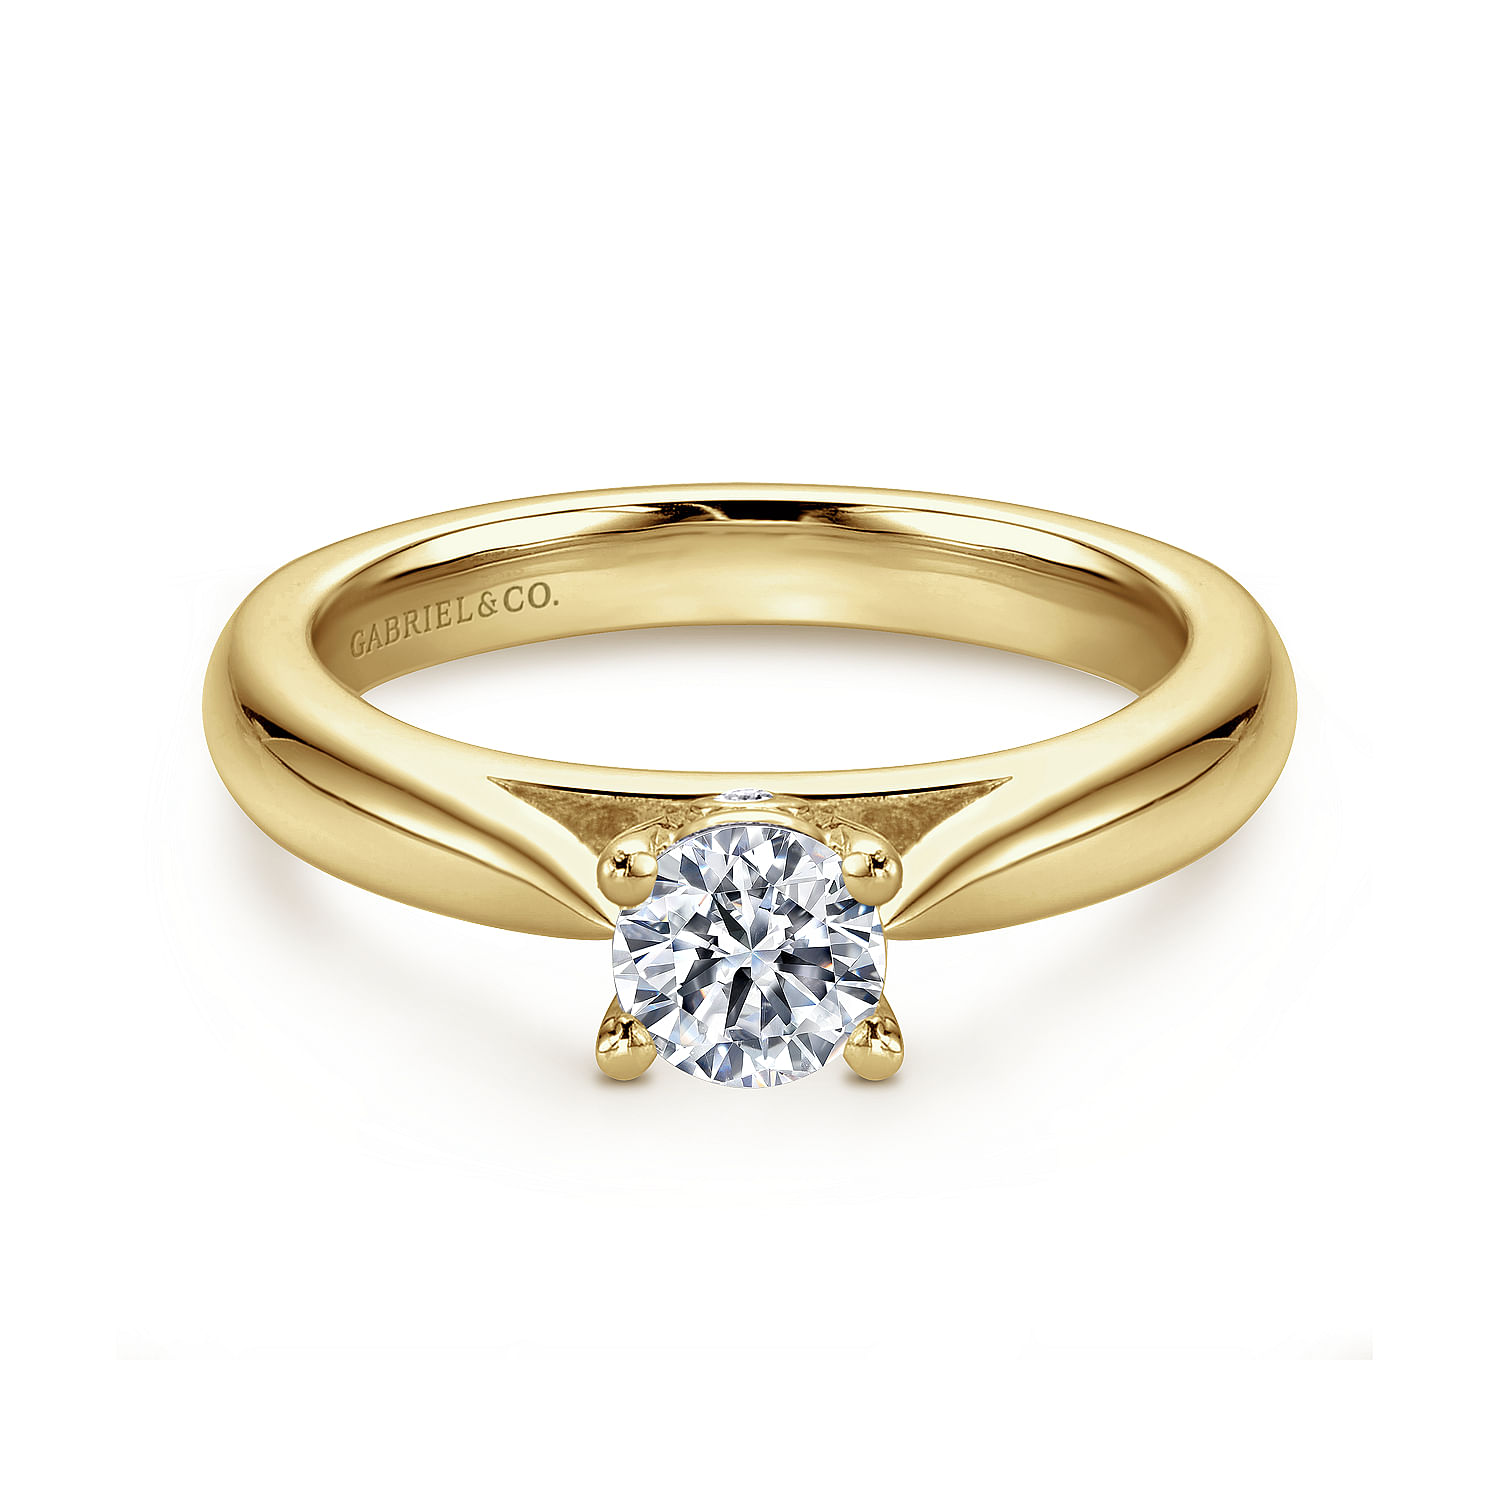 Princess Cut Diamond Ring, Yellow Gold Engagement Ring, Solitaire